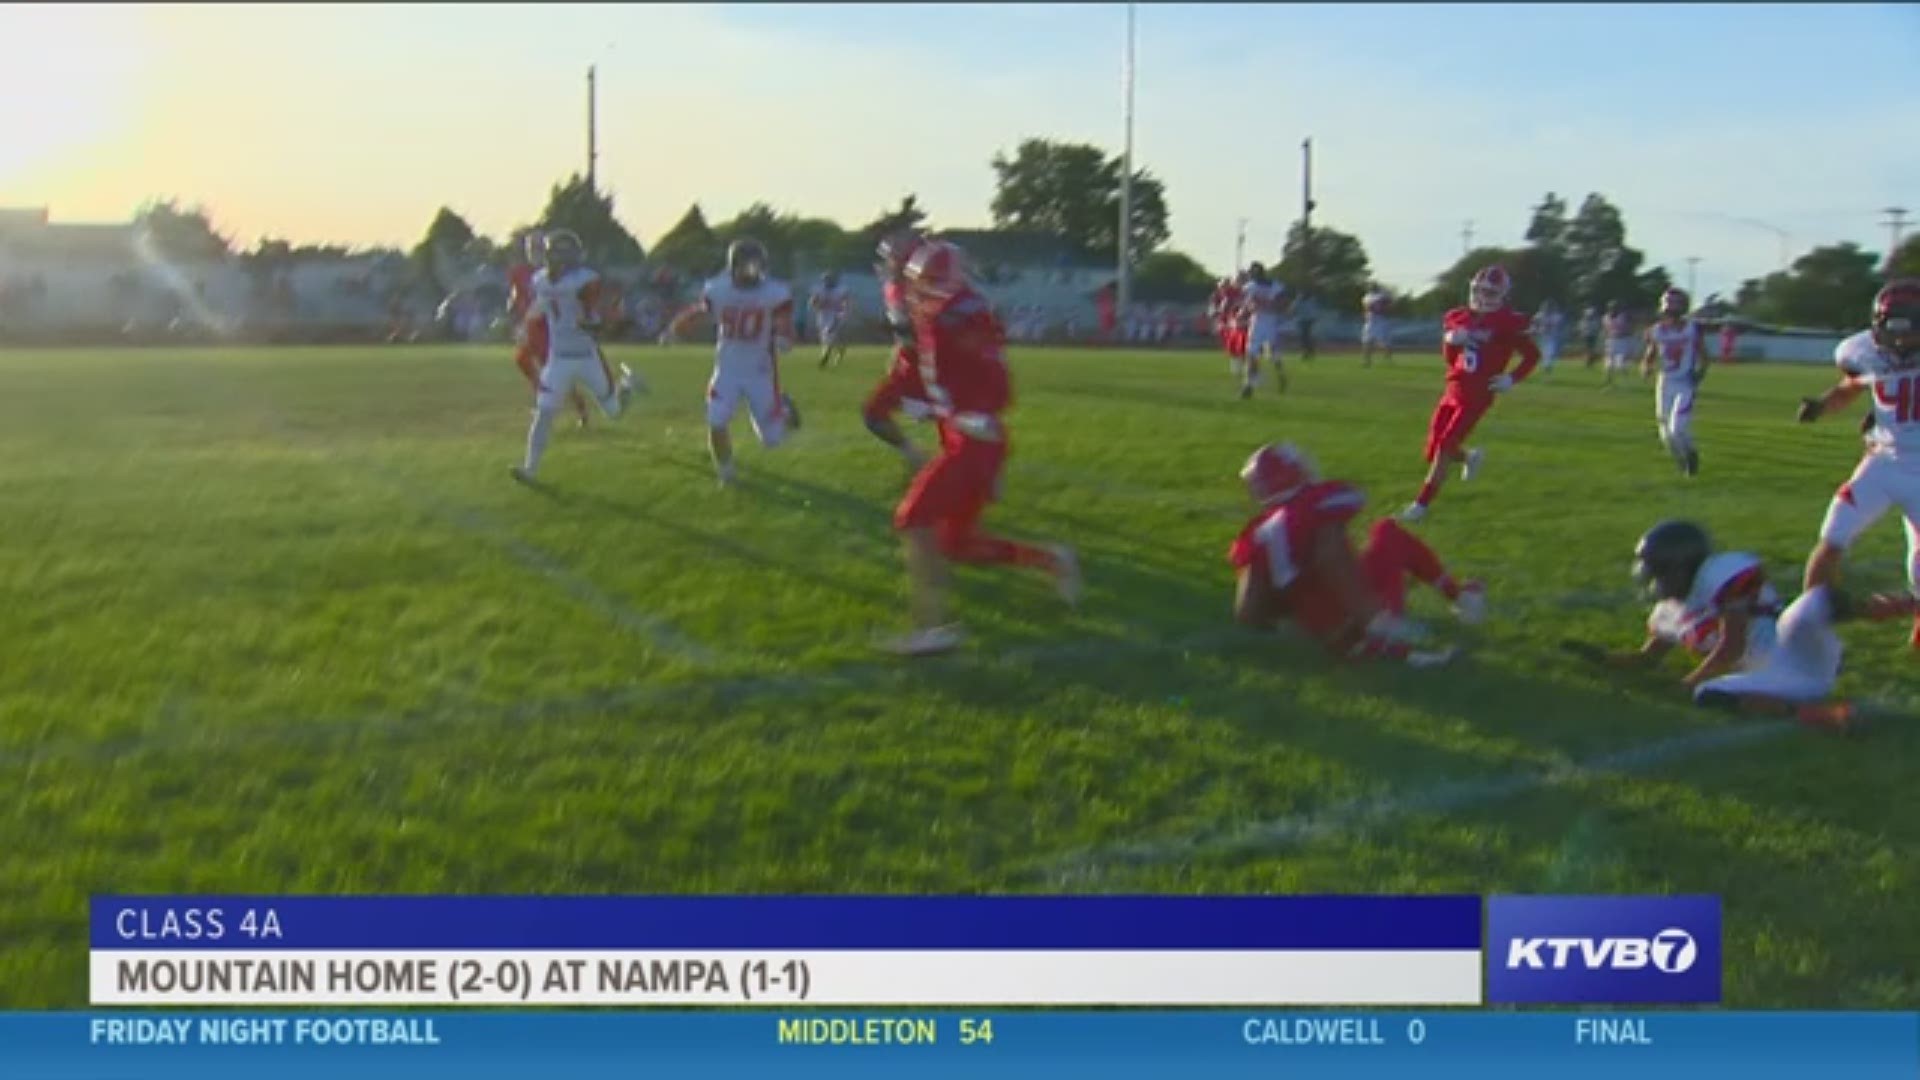 In this Class 4A matchup, the Mountain Home Tigers traveled to Nampa to take on the Bulldogs, hoping to extend their winning streak to three. However, the Bulldogs would win 42-6 and improve to 2-1.